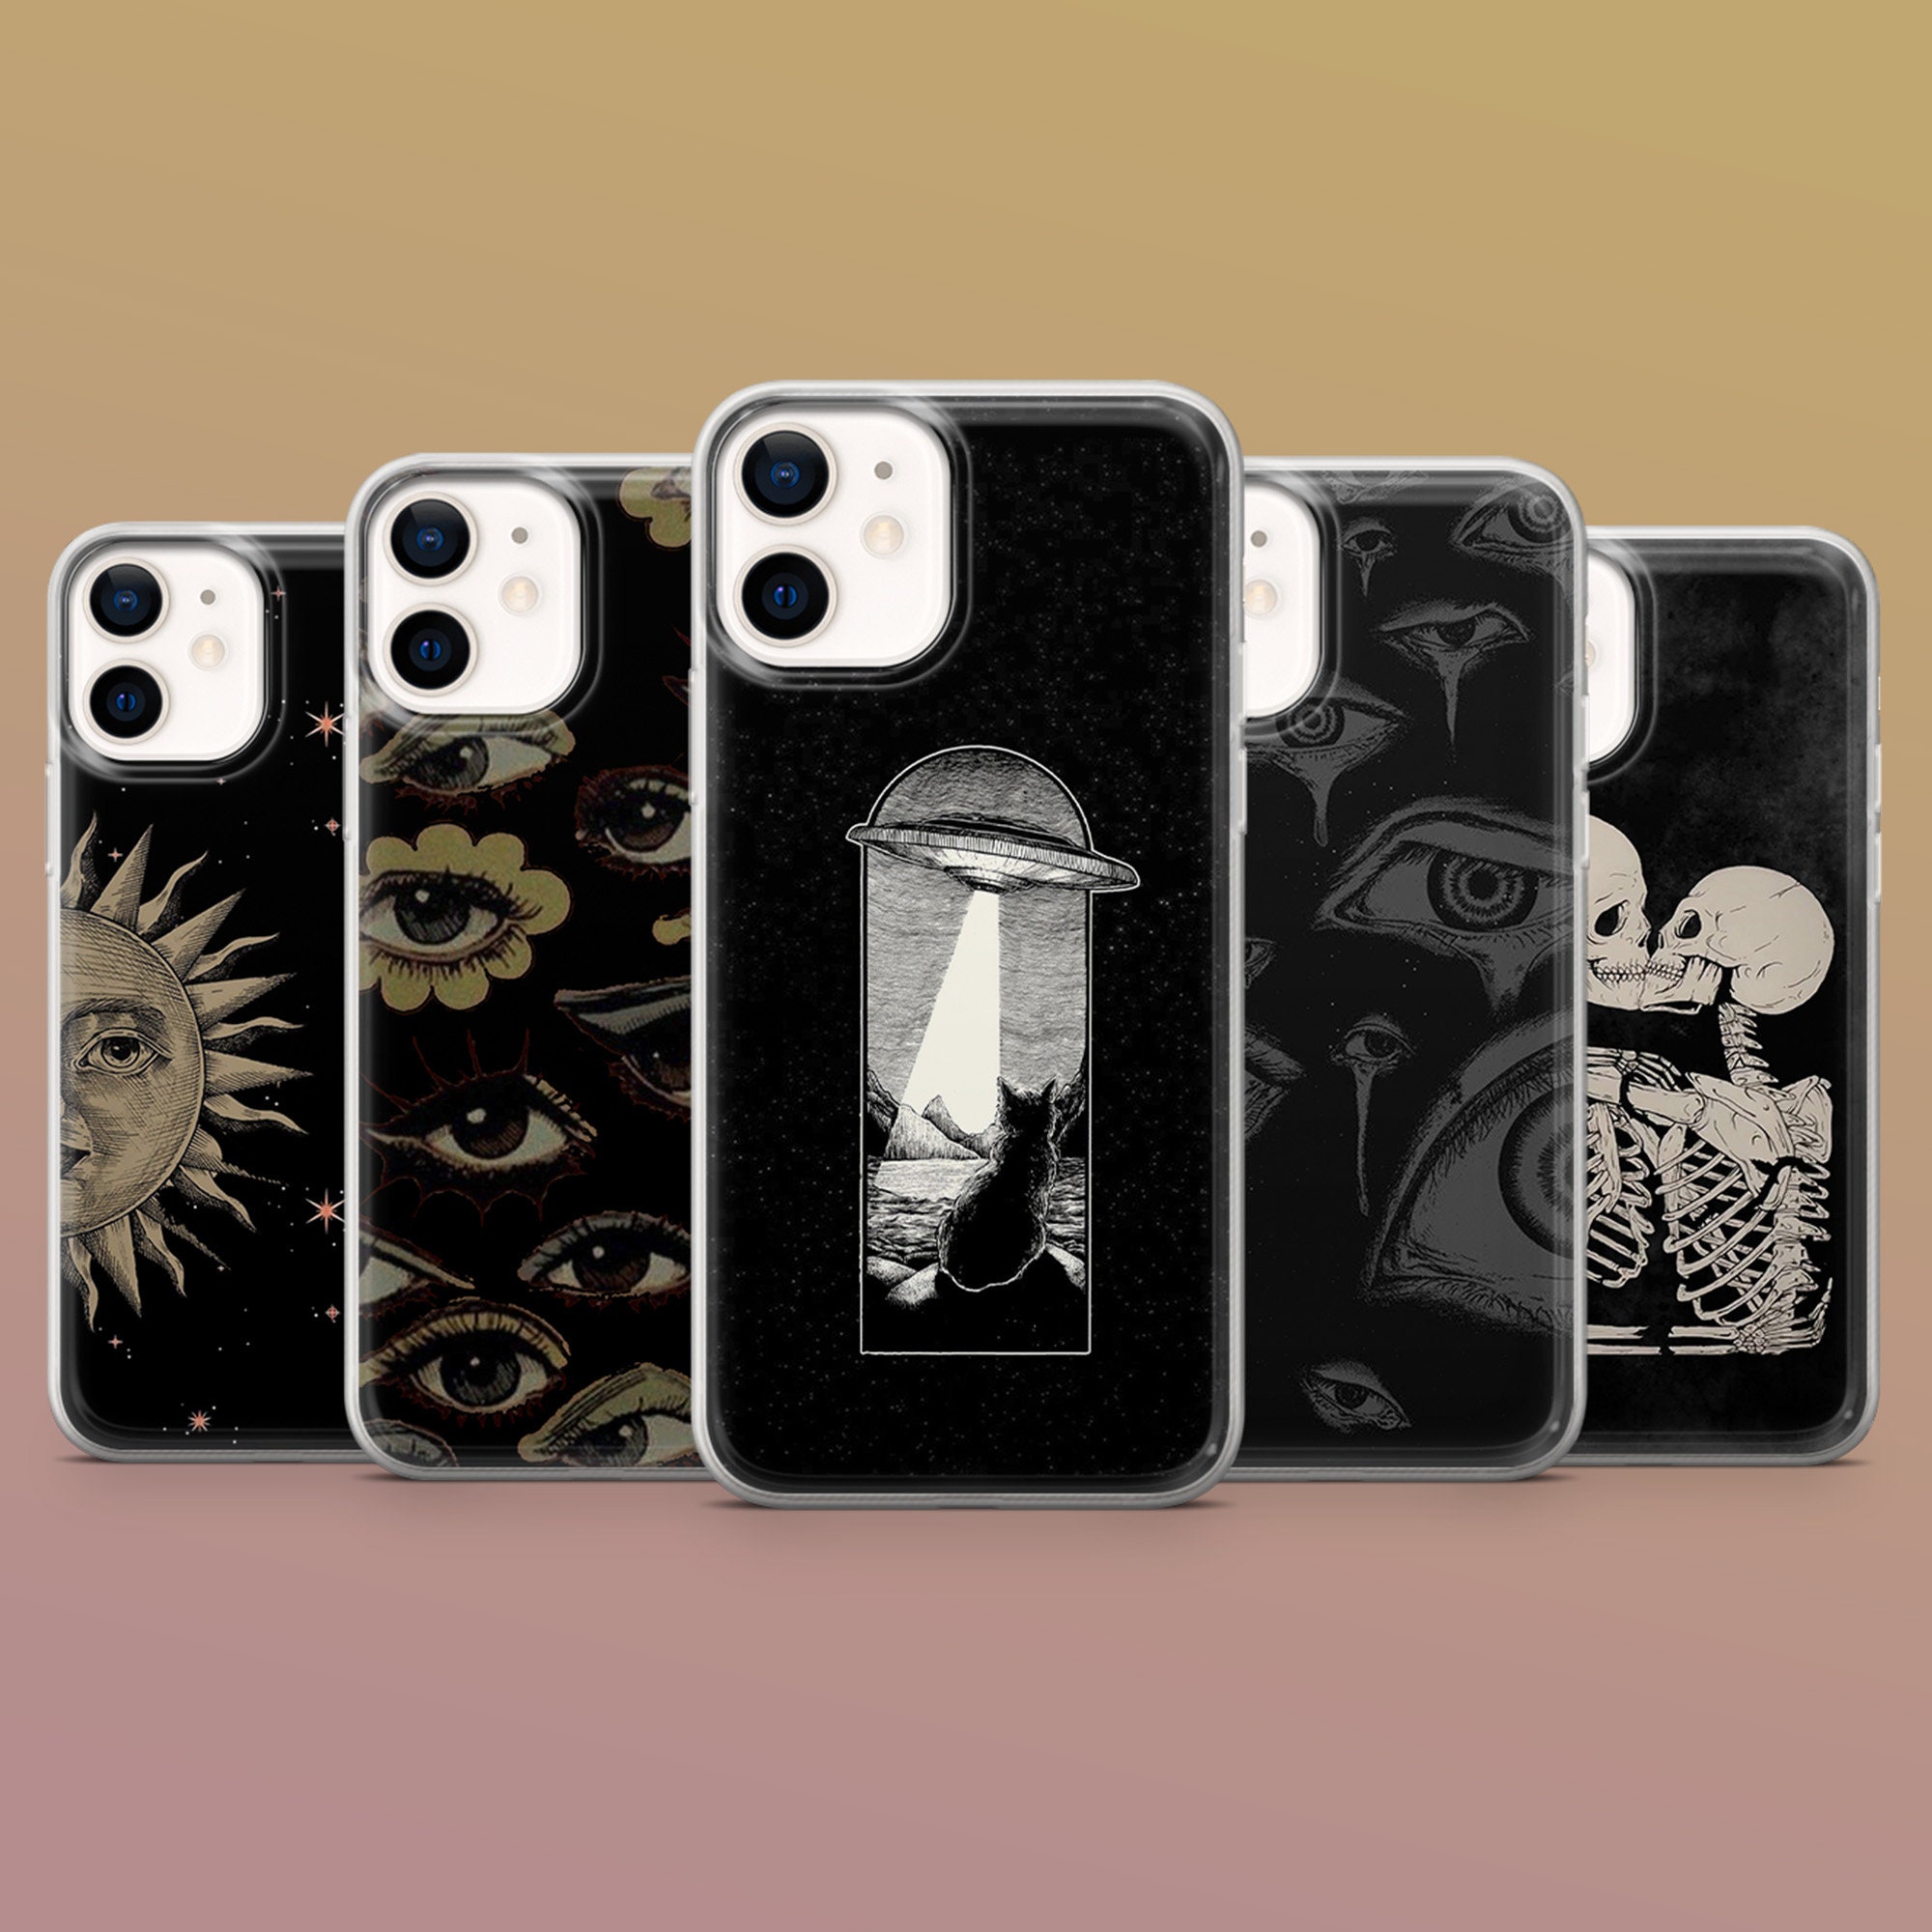 Weirdcore Aesthetic iPhone Case for Sale by Keviesa19